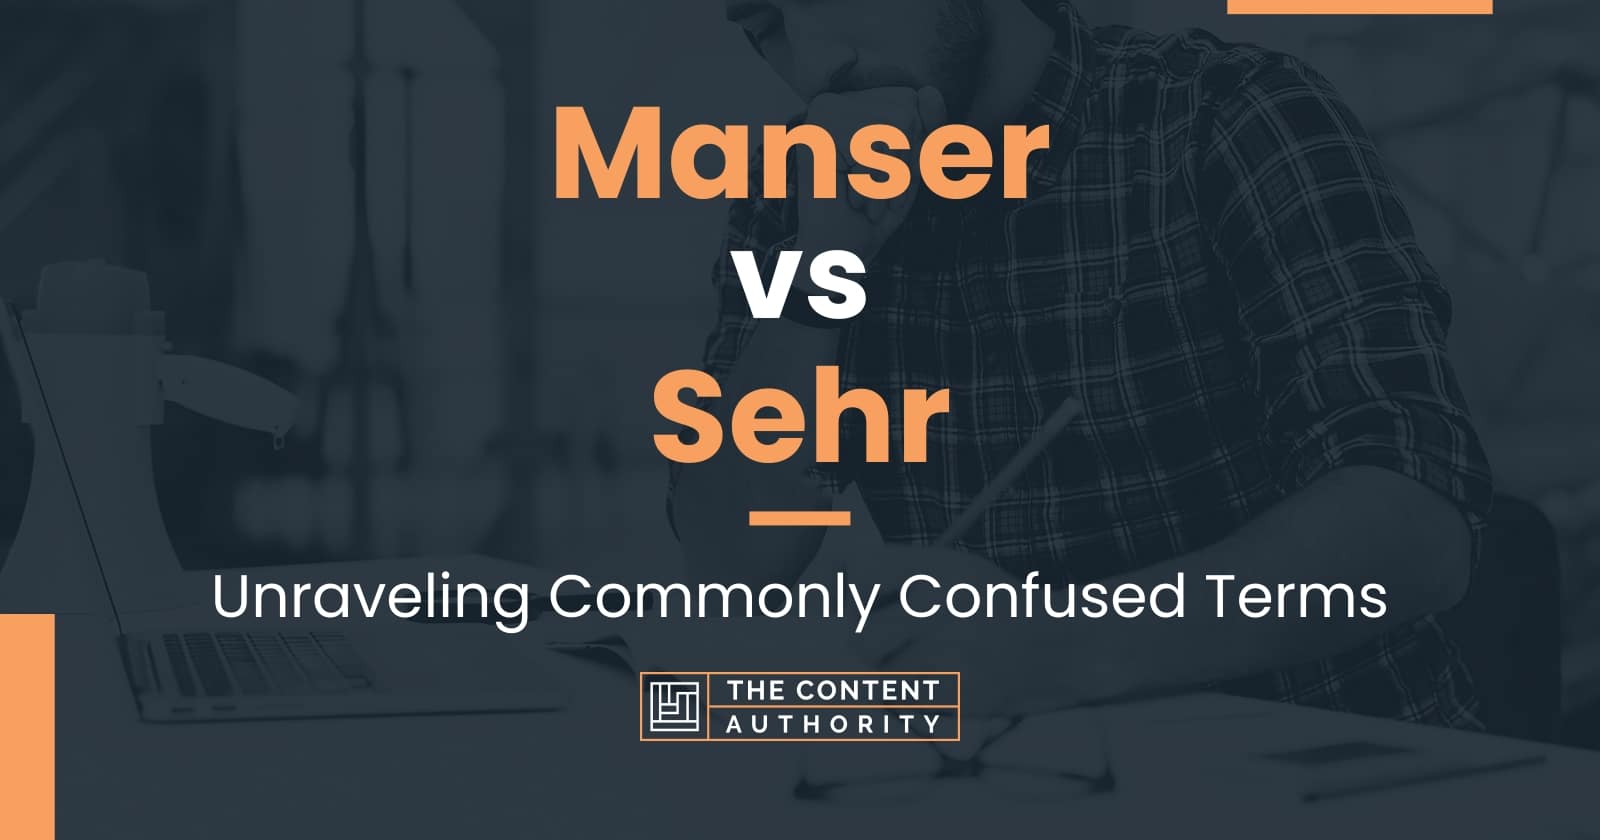 Manser vs Sehr: Unraveling Commonly Confused Terms